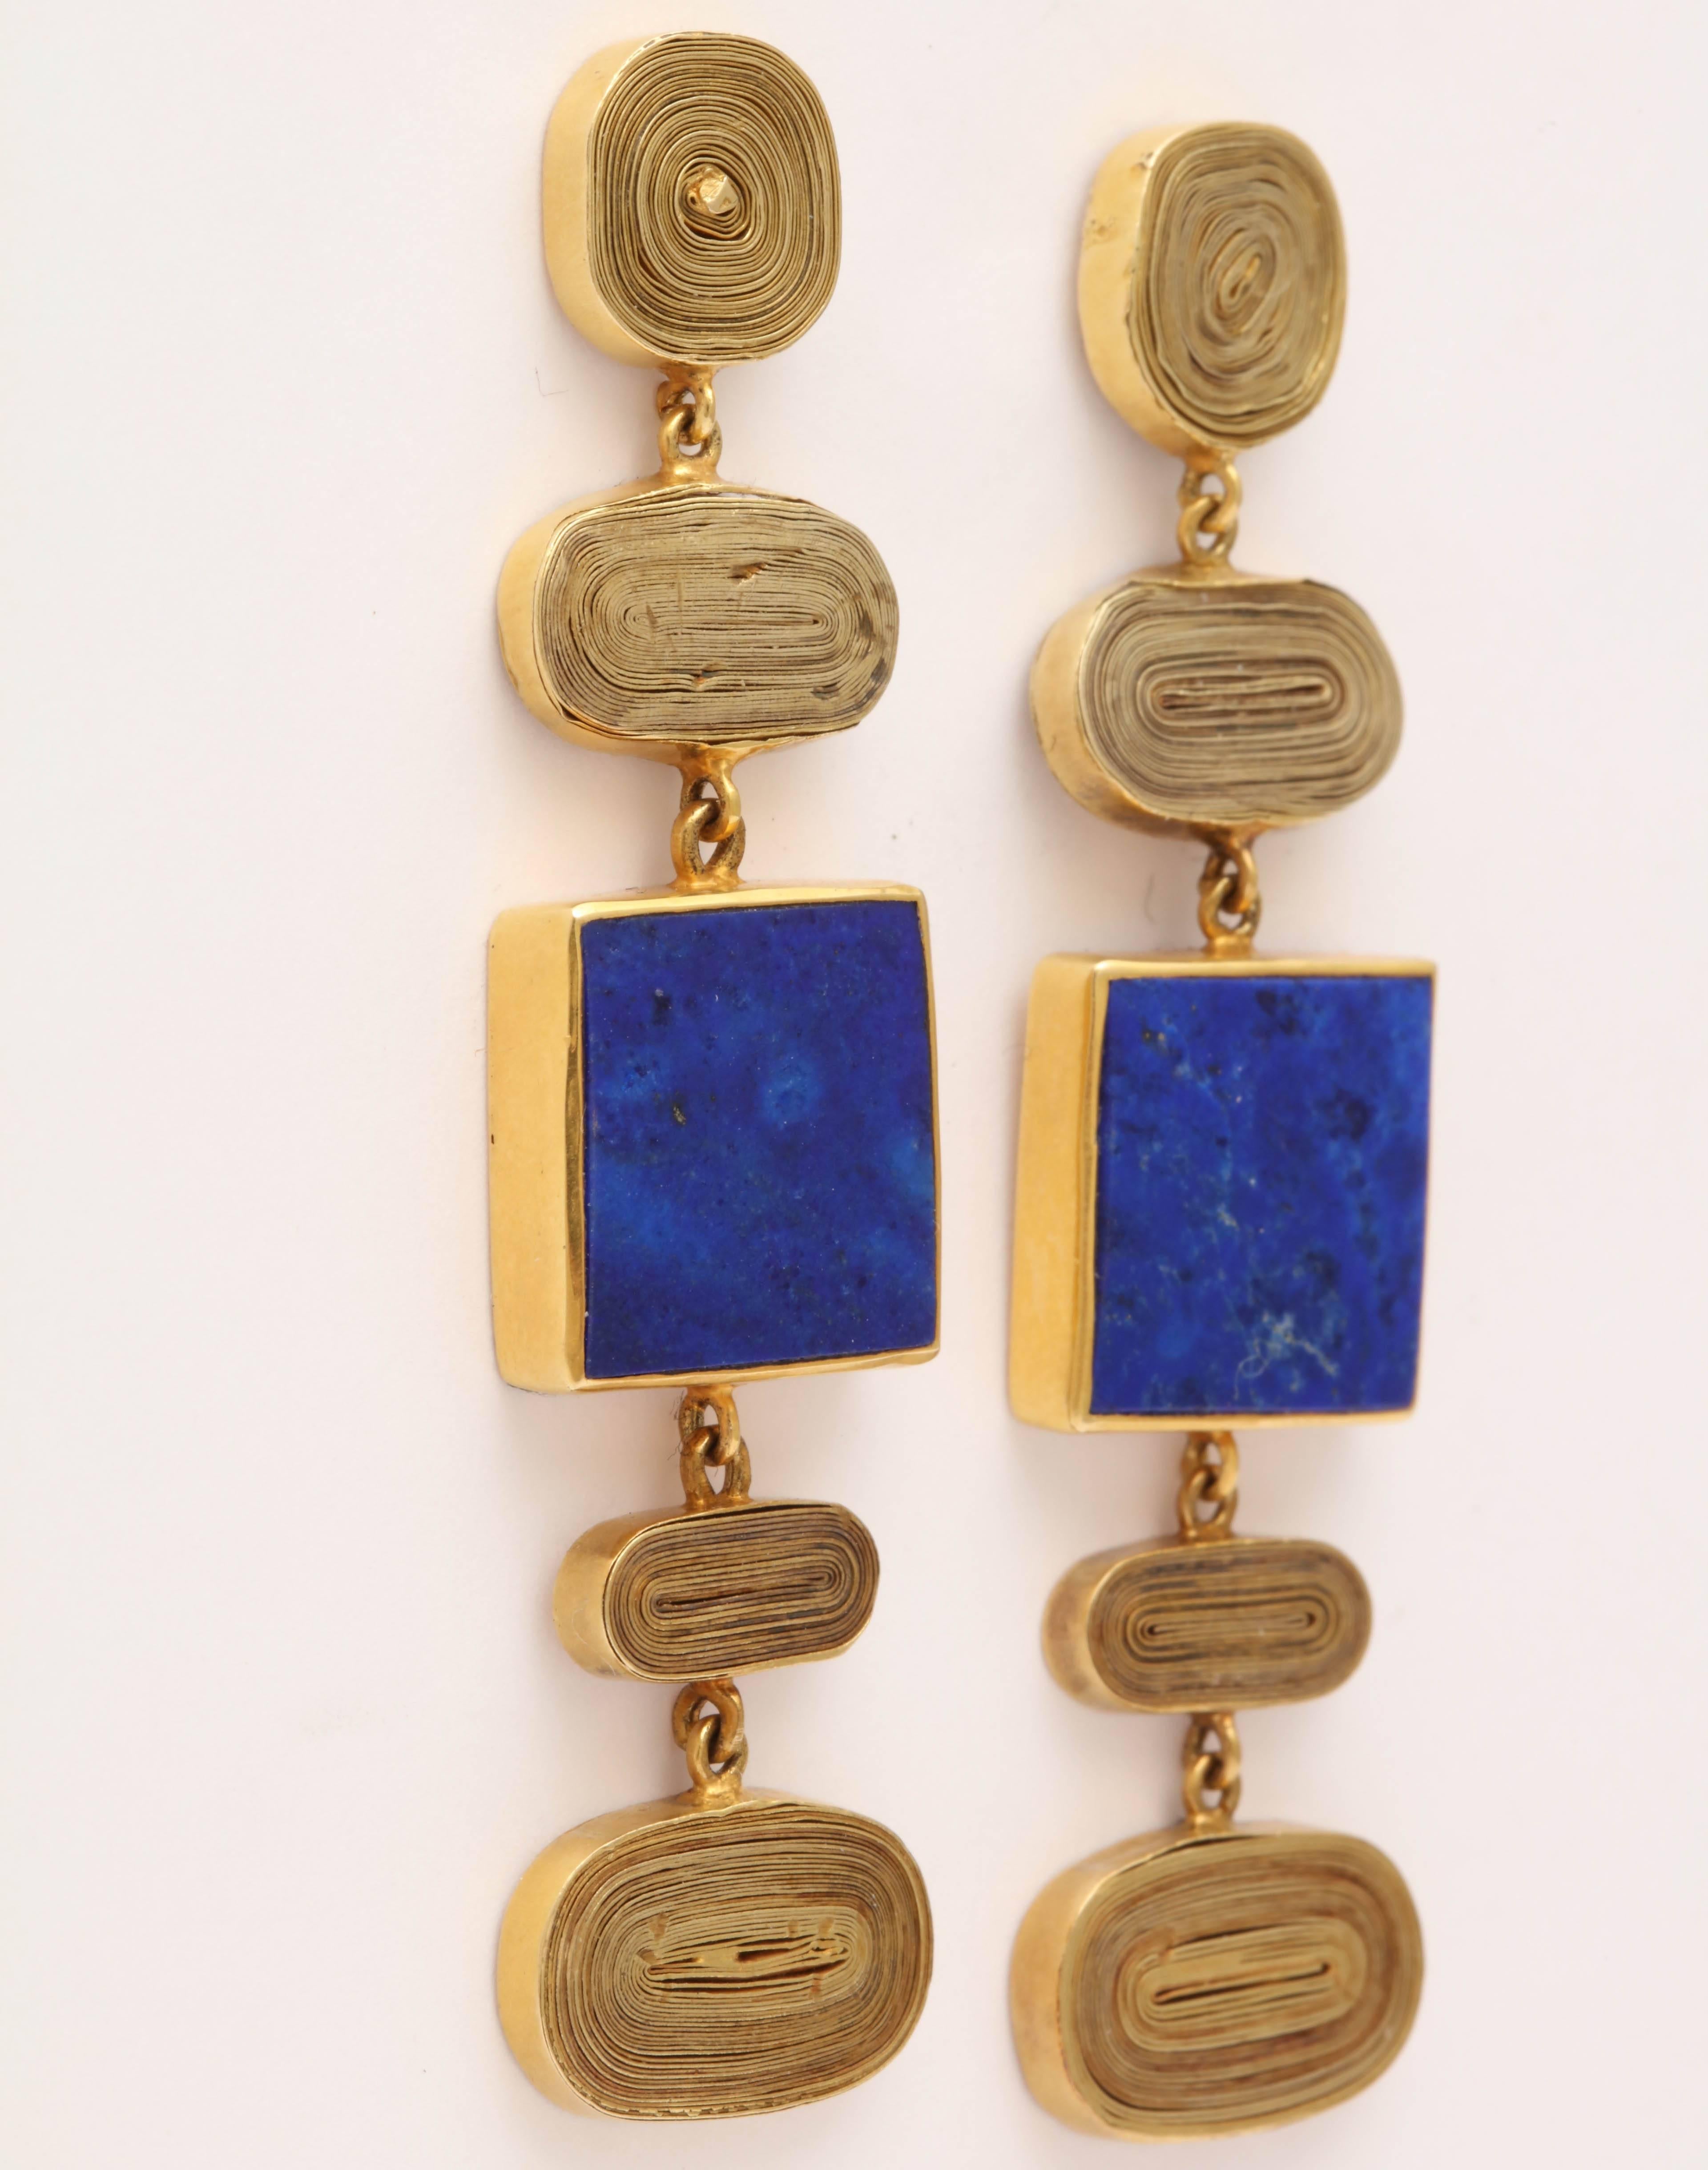 A pair of 18kt yellow gold and lapis lazuli pendant earrings. The earrings are composed of coiled gold plaques and bezel set square lapis lazulis plaques 

Length: 2.35 inches
Width: .55 inch